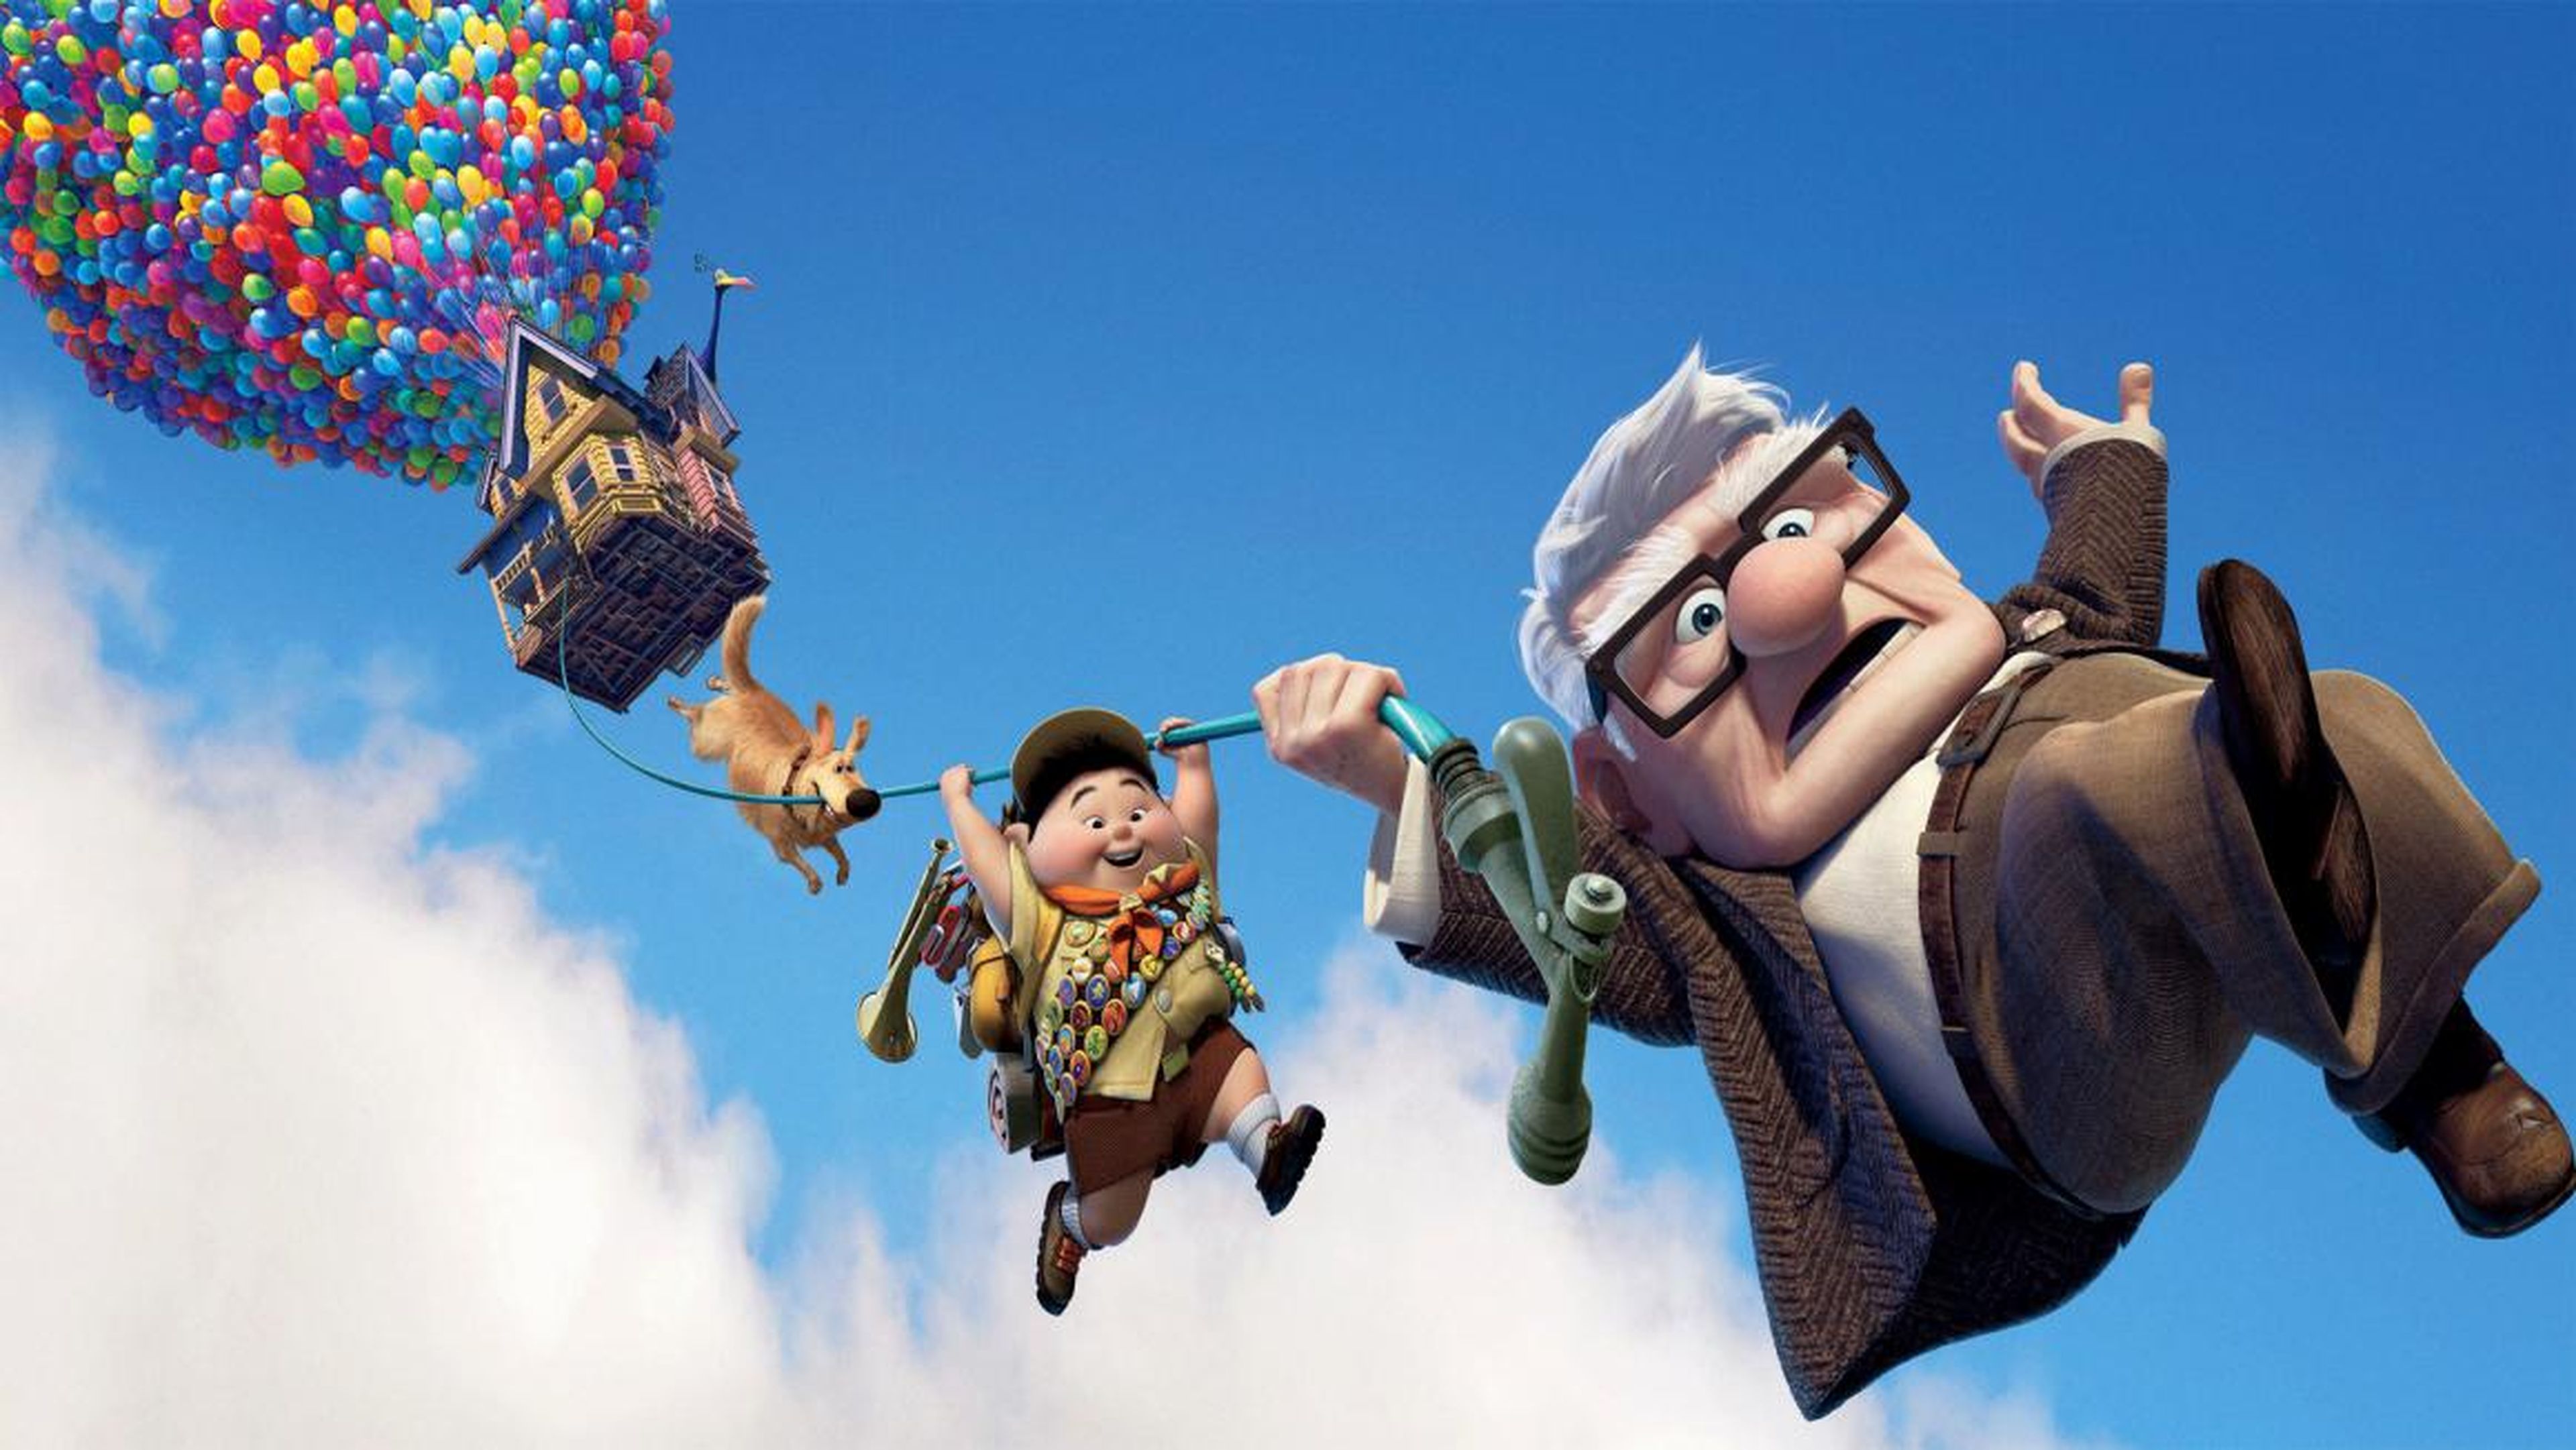 2009: “Up”